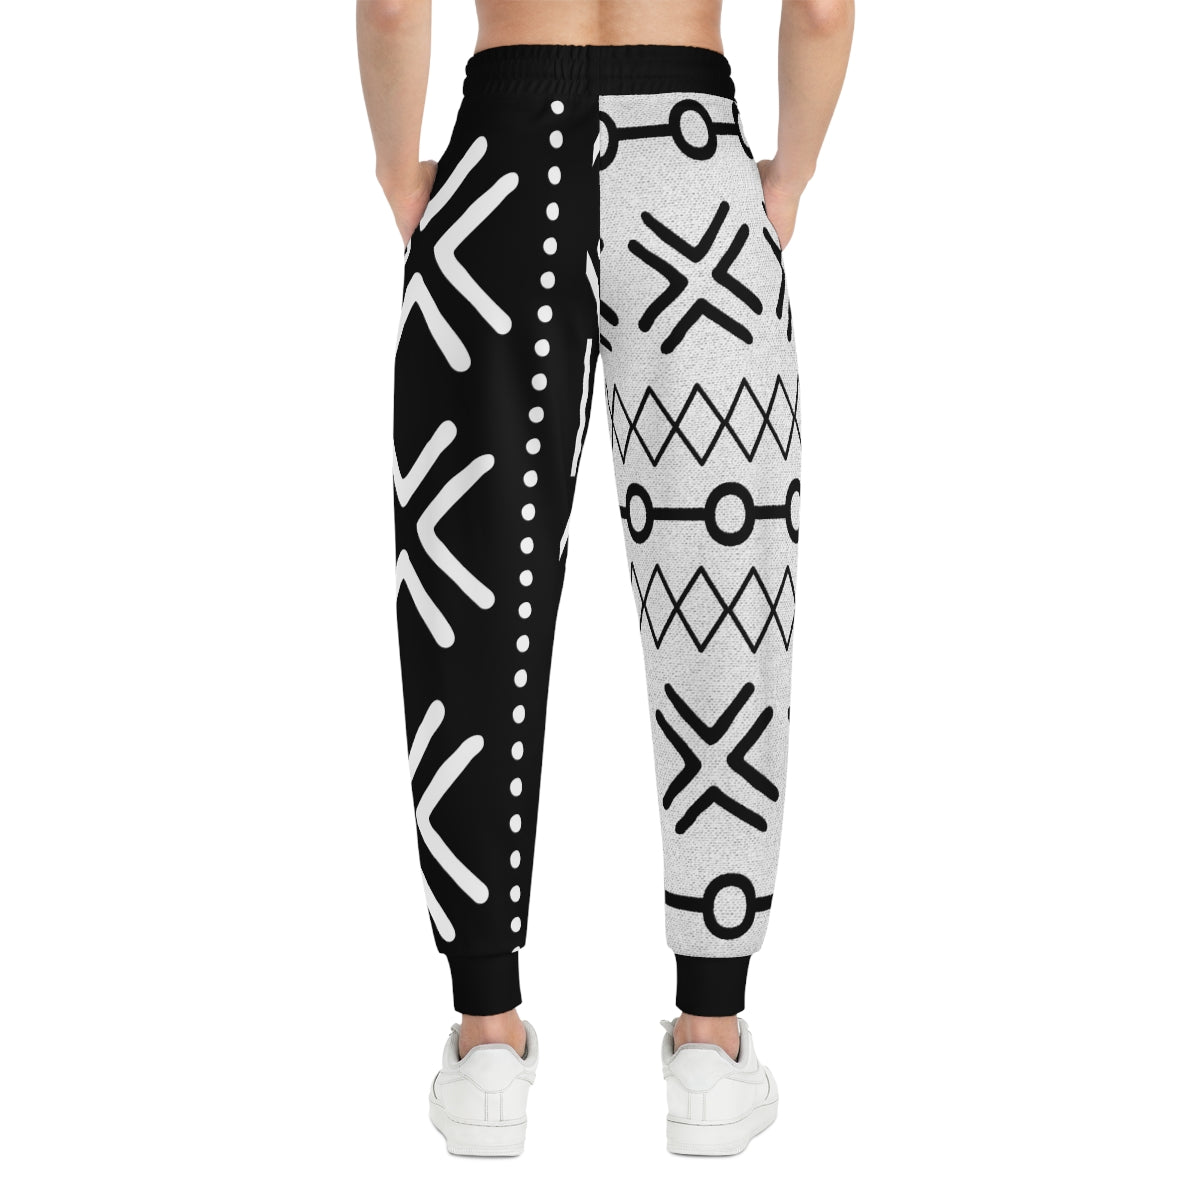 Unisex Mixed MudCloth Black and White Pattern Joggers Pants